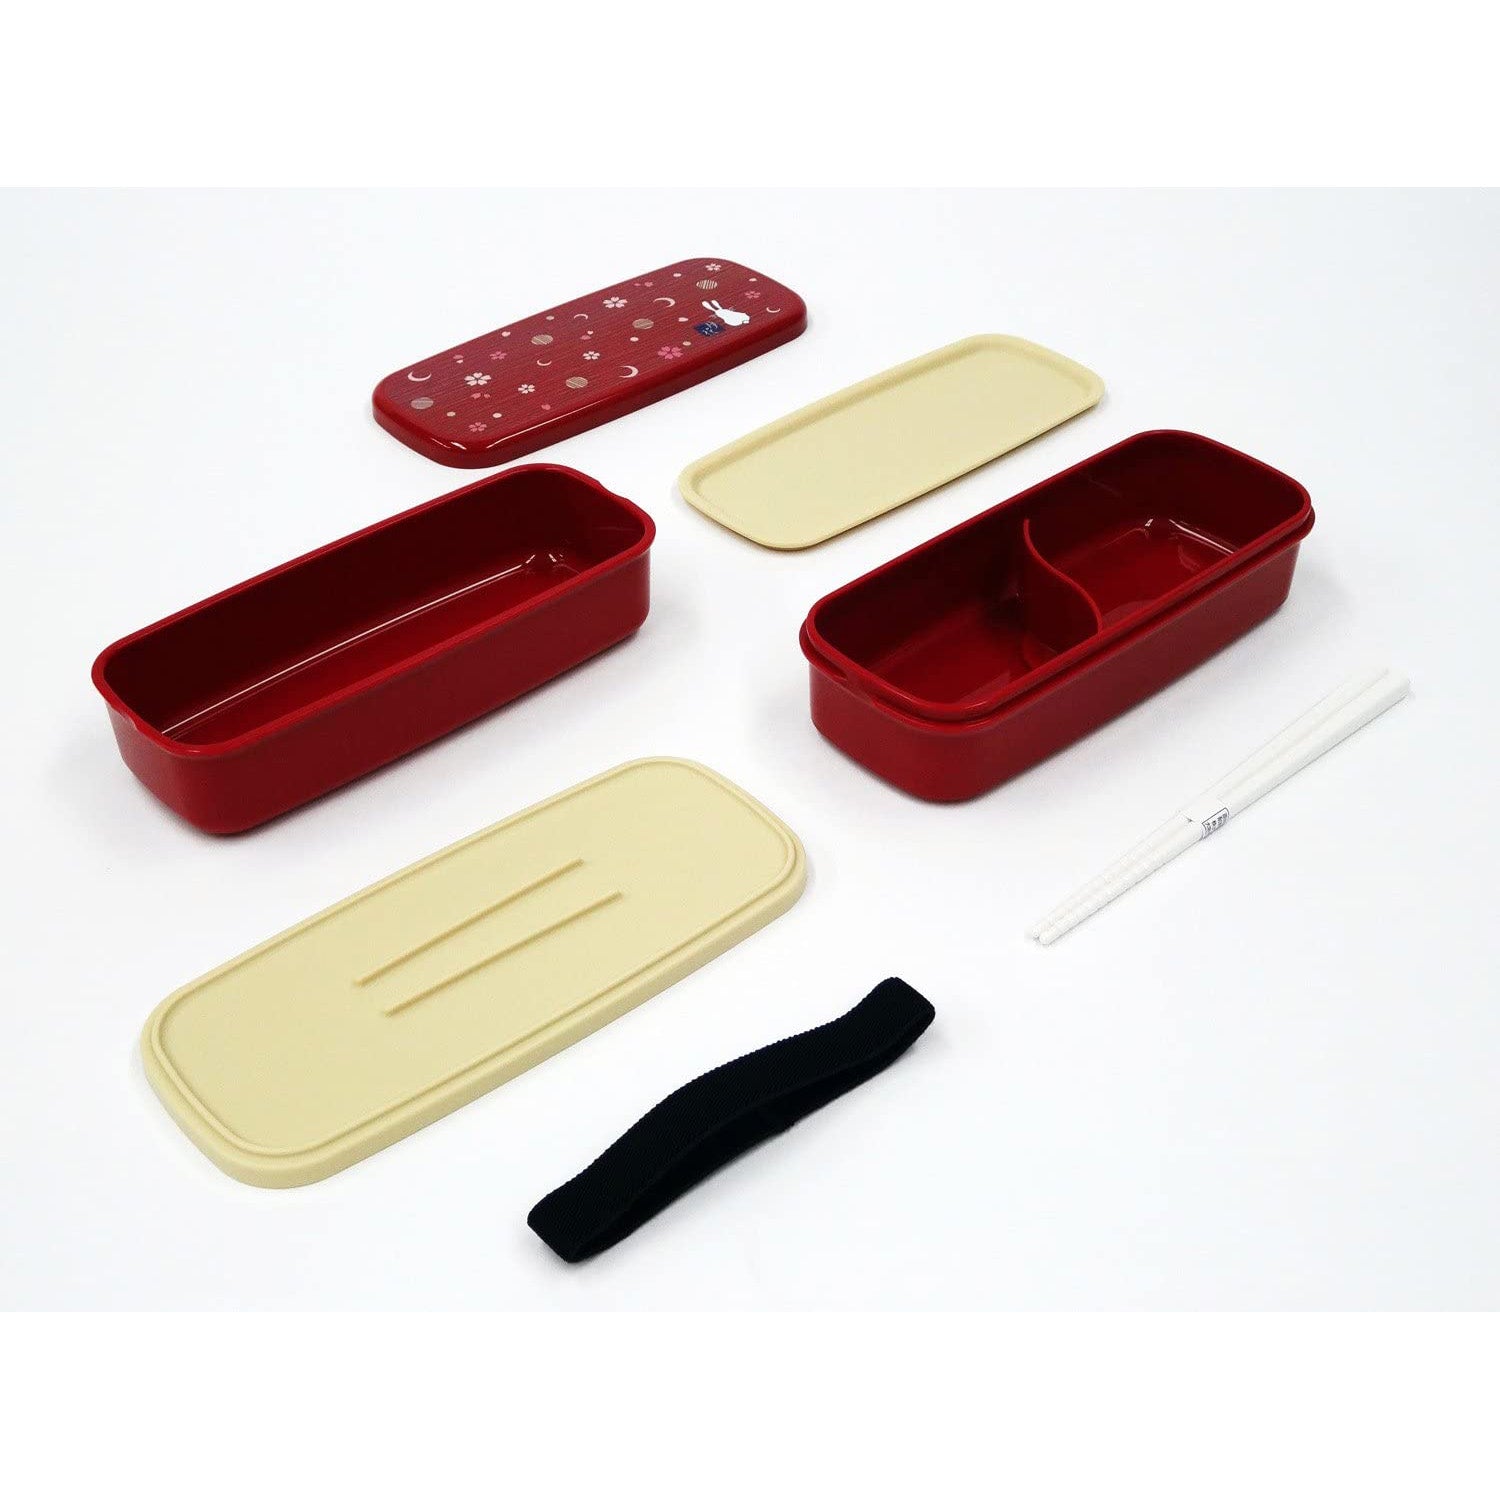 Fukui Craft ABS Resin Deluxe 5-Divided Bento Lunch Box - Globalkitchen Japan